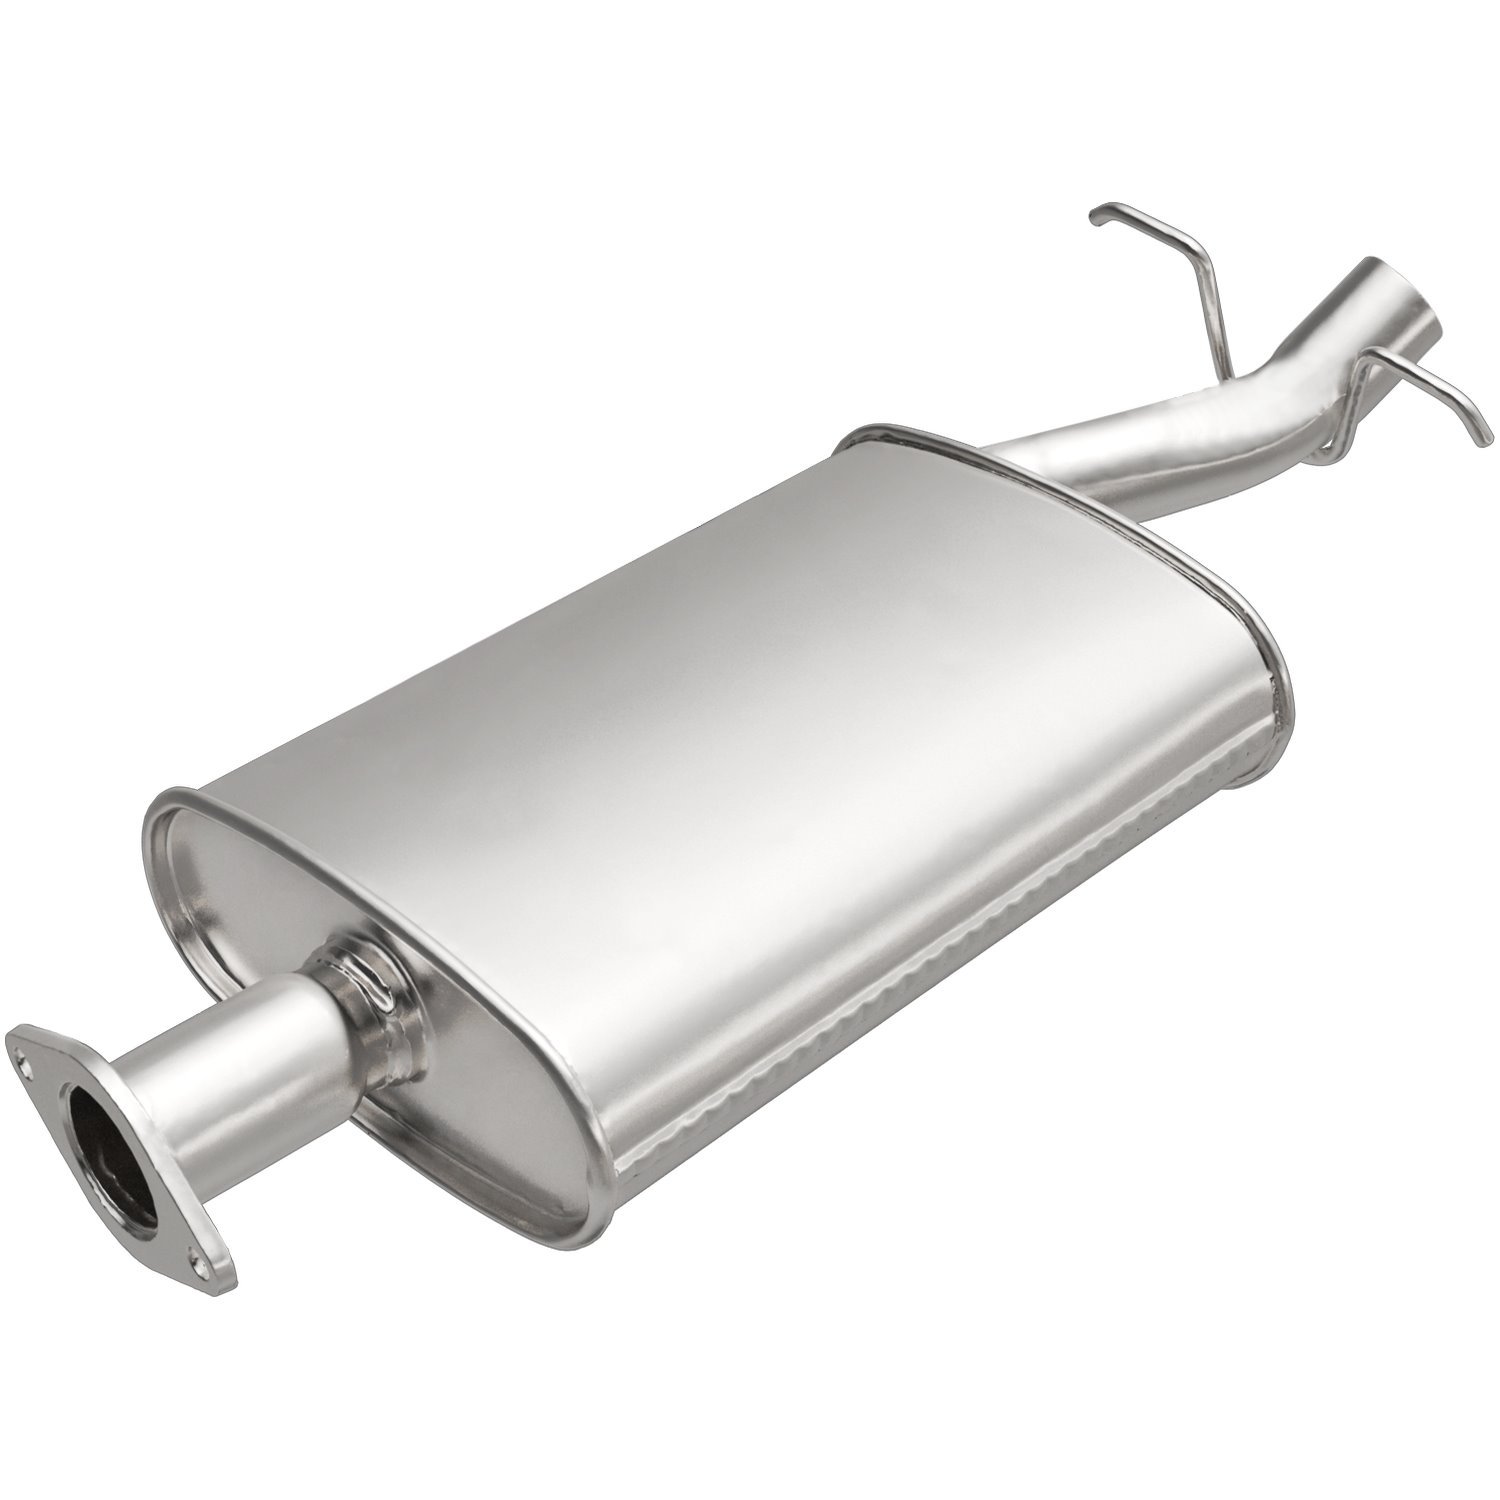 Direct-Fit Exhaust Muffler, 1986-1989 Ford Bronco II 2.9L